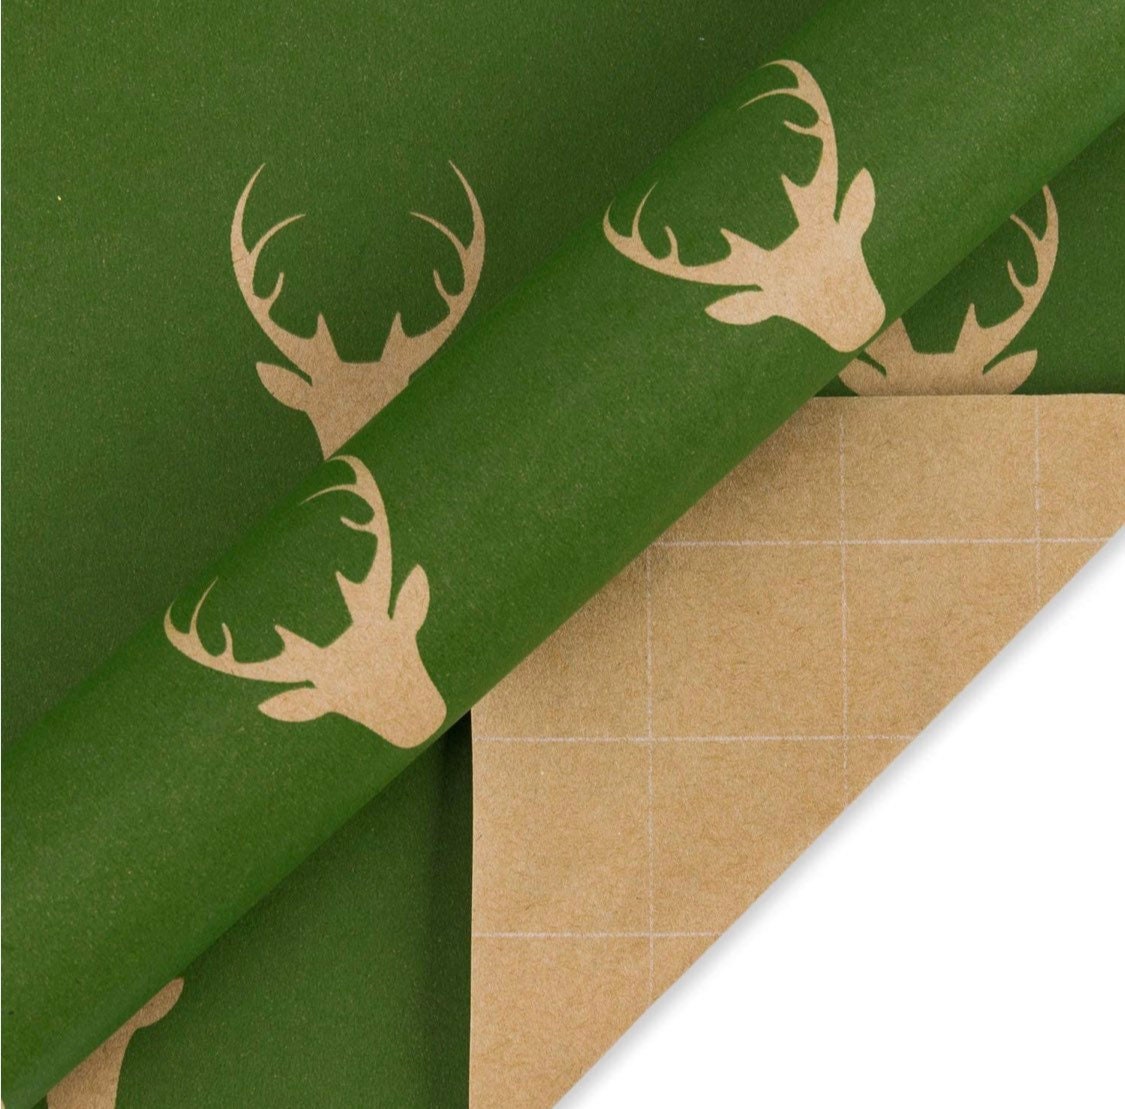 Wrapping paper set - 6ct Brown paper gift wrap - Eco friendly sustainable recyclable Kraft paper for Christmas gifts